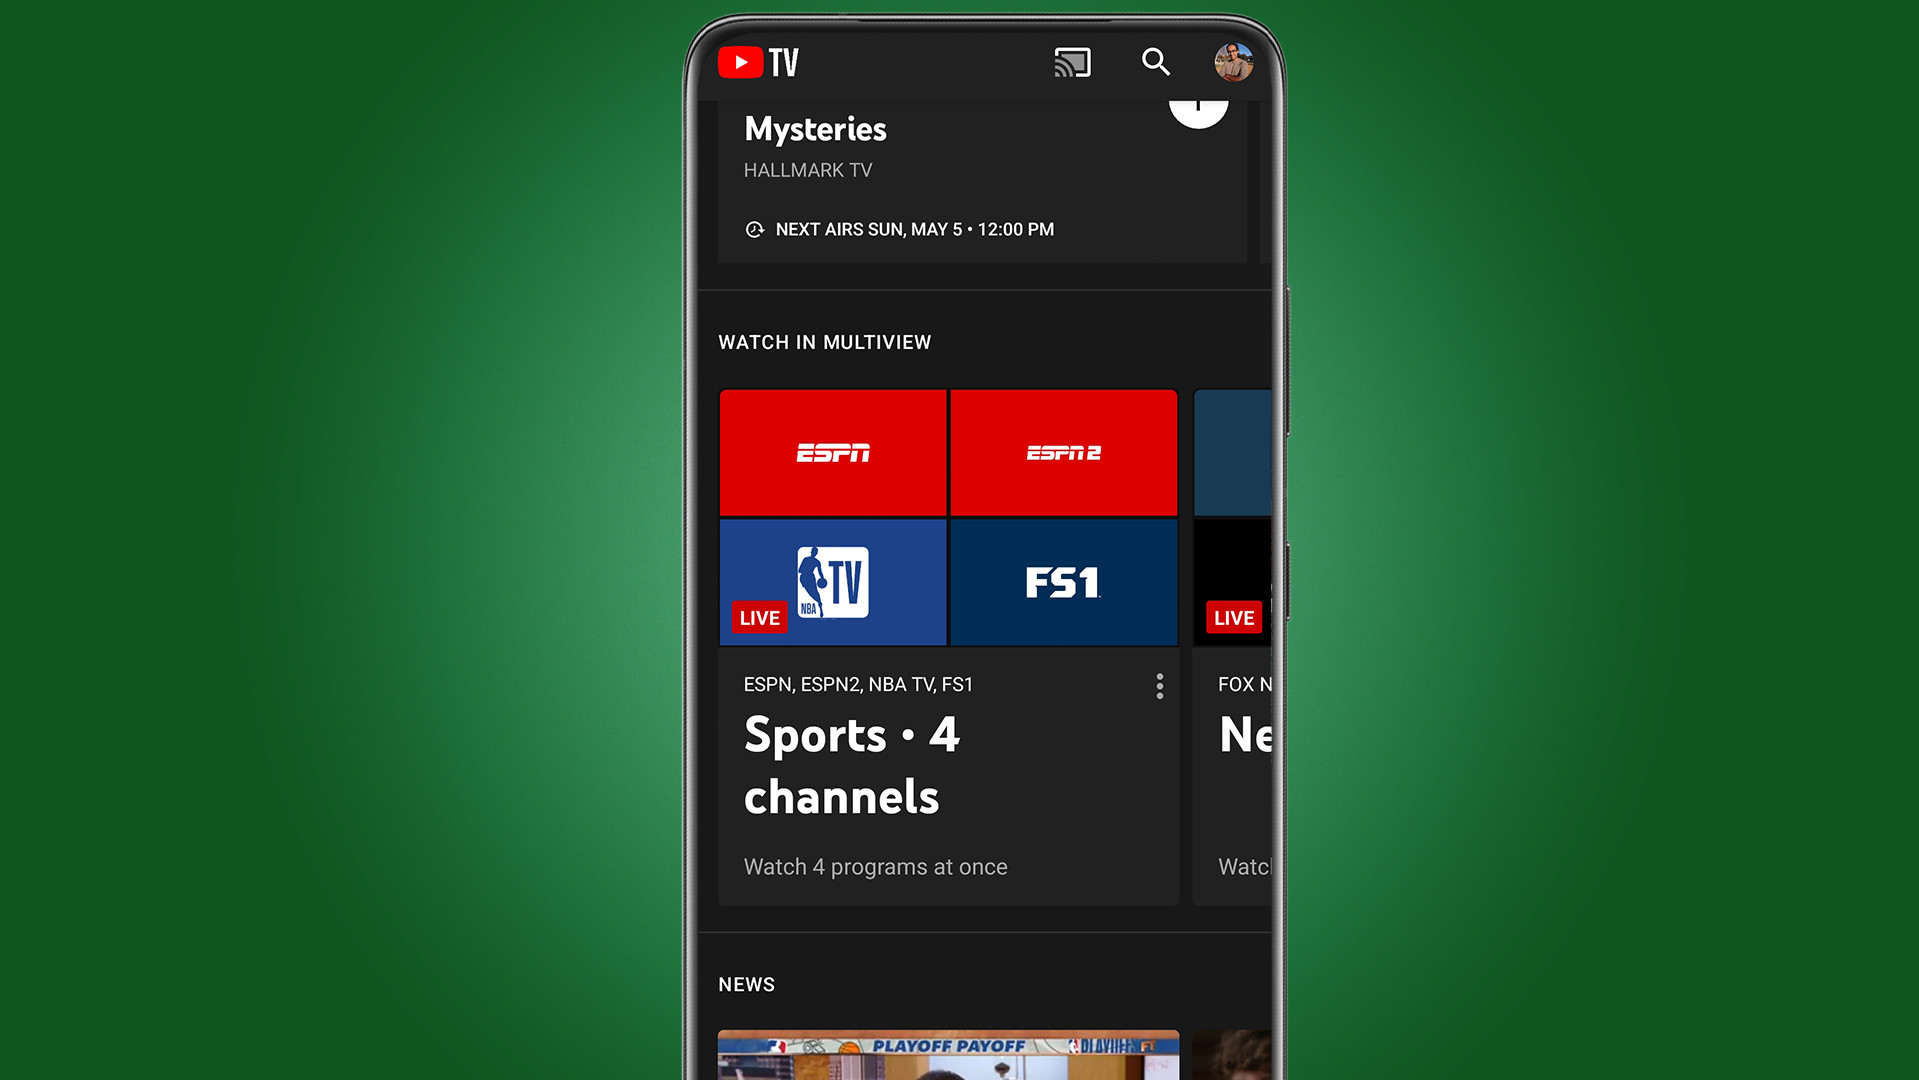 YouTube TV Multiview section on Android